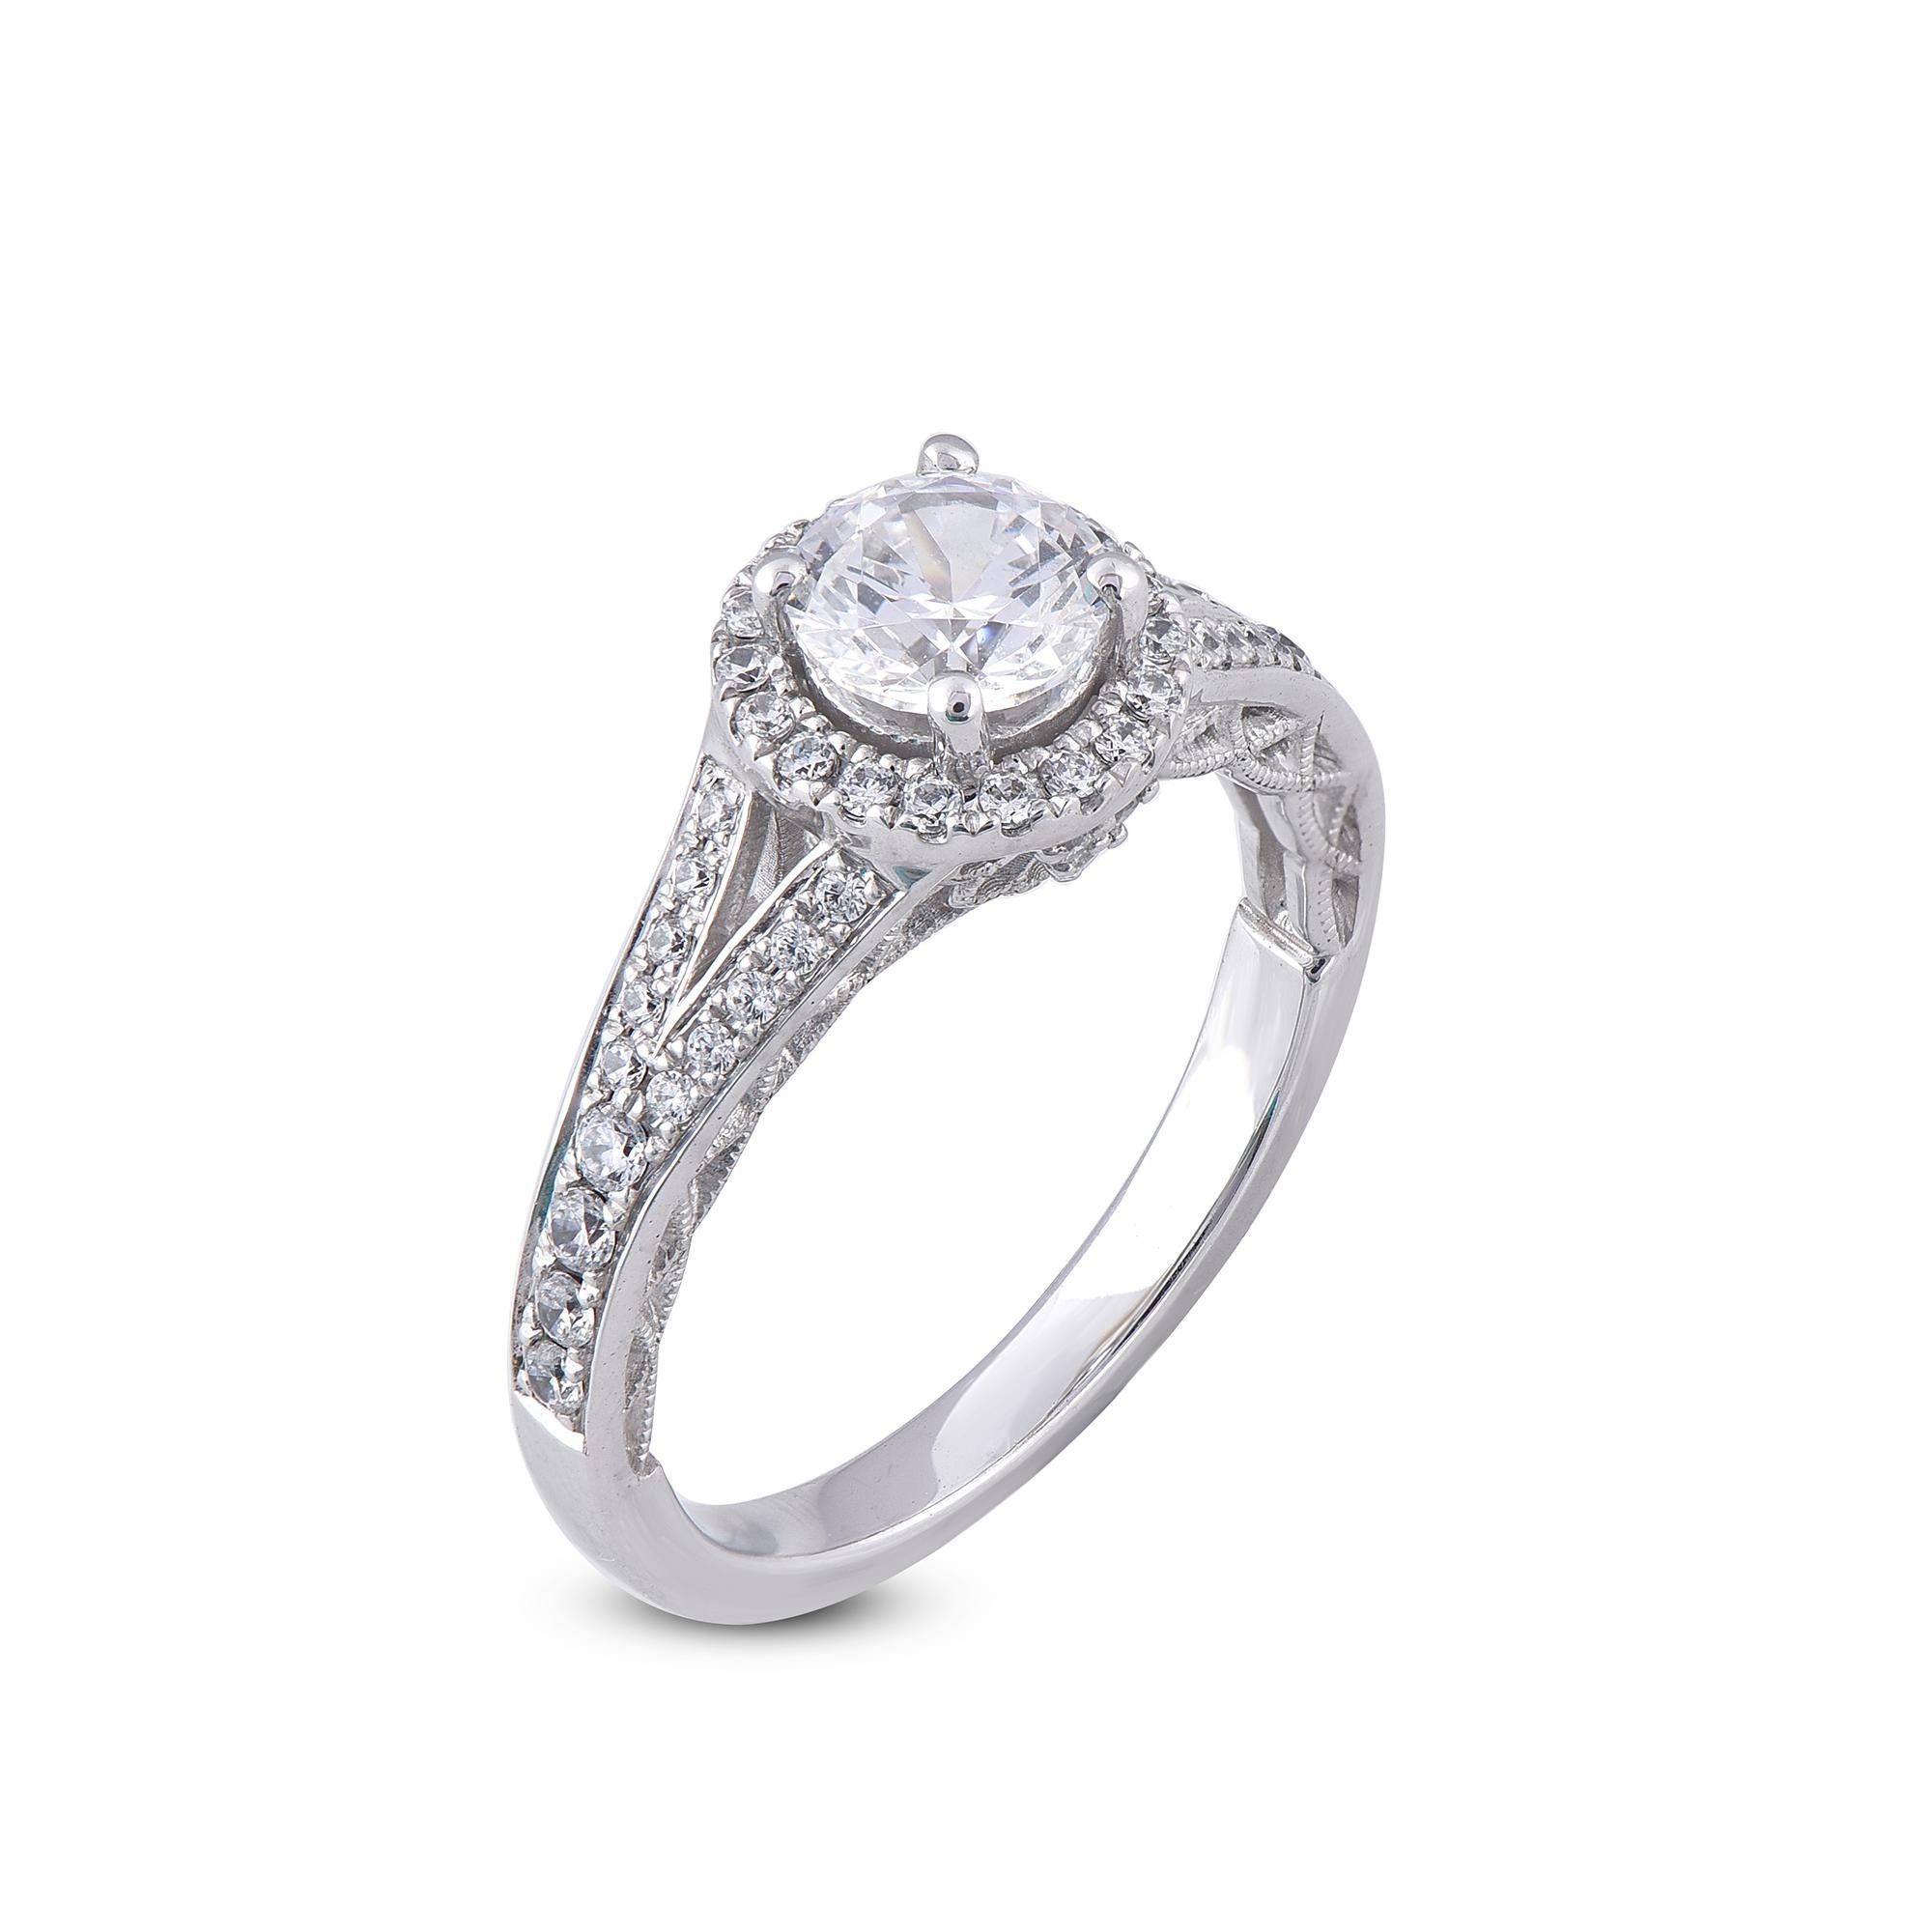 An effortless classic, this diamond engagement ring is beautiful symbol of your affection. This engagement ring features 0.80 ct of centre stone of diamond frame and 0.40 ct Shank lined with rows of 53 round sparkling diamonds in secured prong